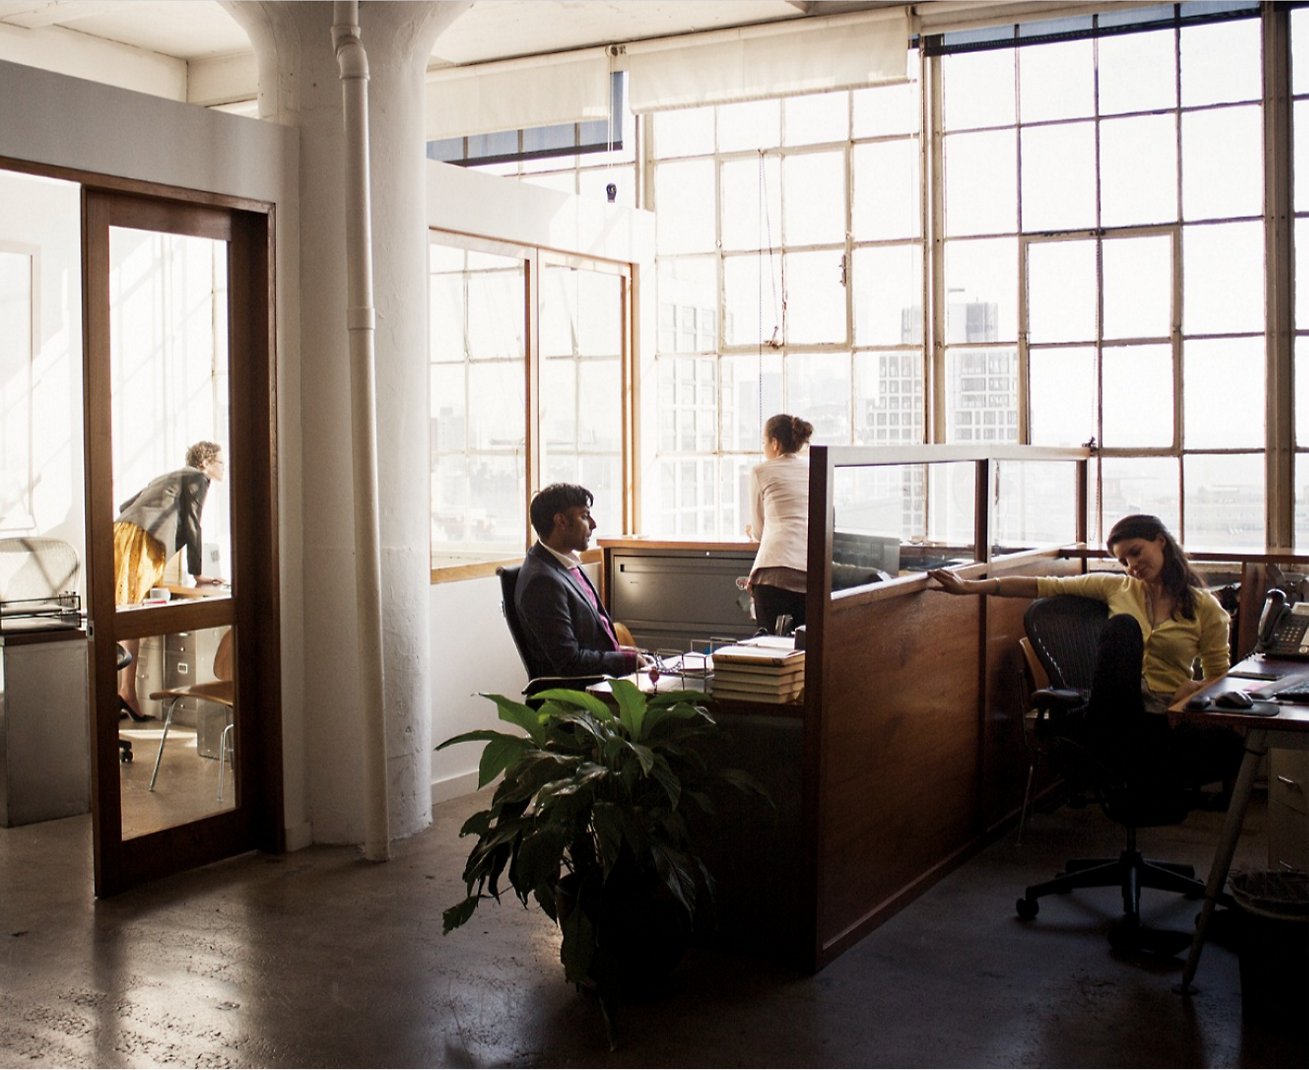 A group of people sitting at desks in an office.